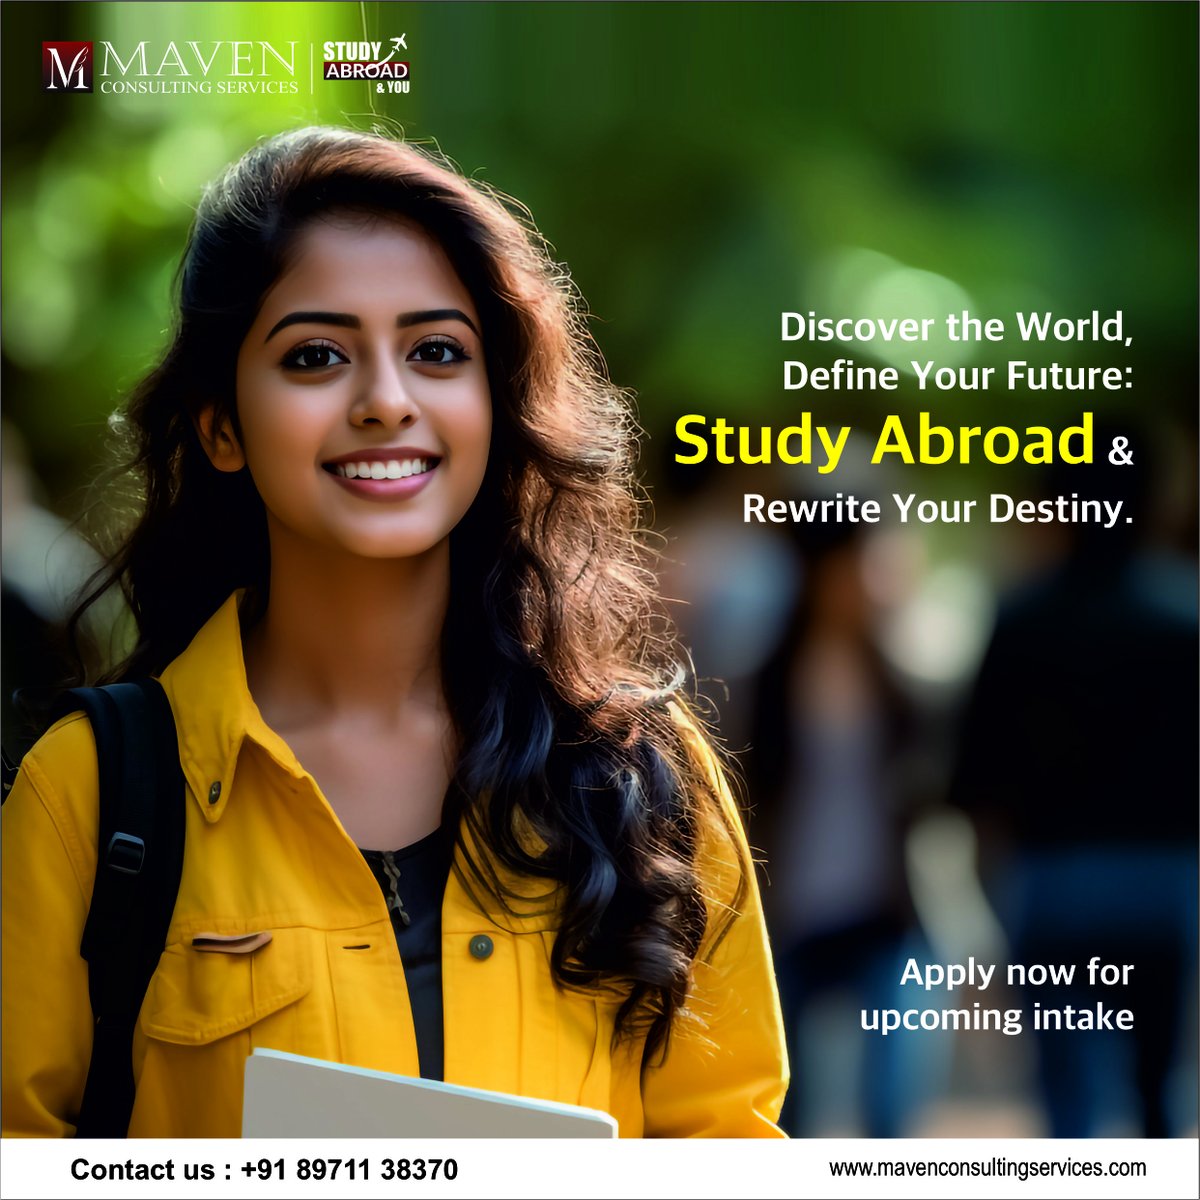 🌍✈️ Explore the globe, shape your destiny! 📚🤩 Apply now for the upcoming intake and embark on an extraordinary study abroad journey that will redefine your future. 🌟✨ #StudyAbroad #FutureGoals #GlobalEducation
Get in touch with us for expert counselling
at +91 89711 38370